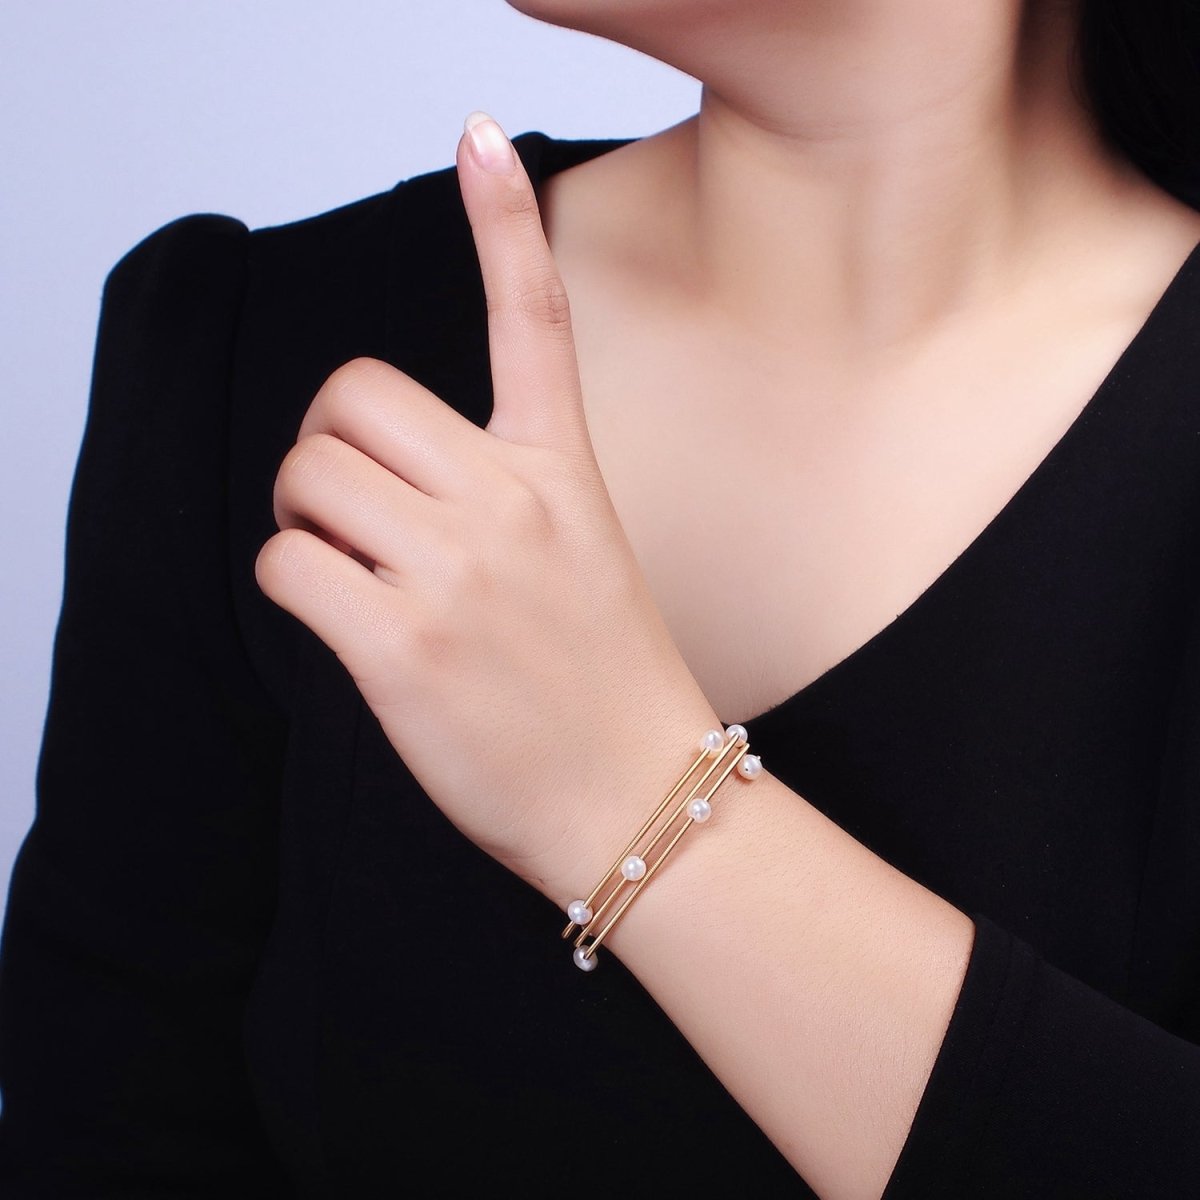 Layer Pearl Cuff Bracelet White Pearls Gold Filled Bangle Textured Bracelet WA1868 - DLUXCA